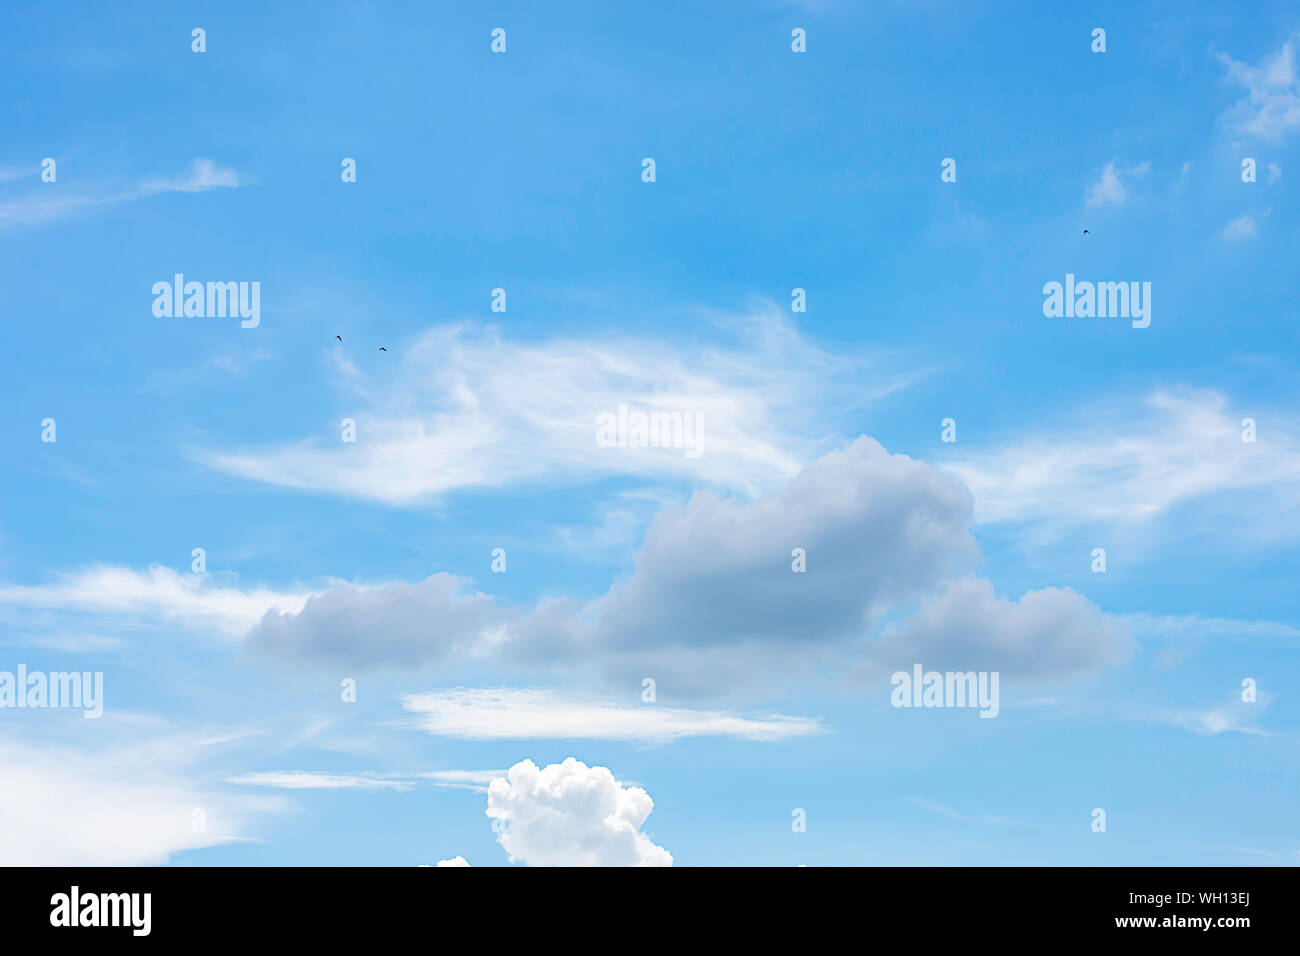 Rain clouds and birds are flying in the blue sky. Stock Photo